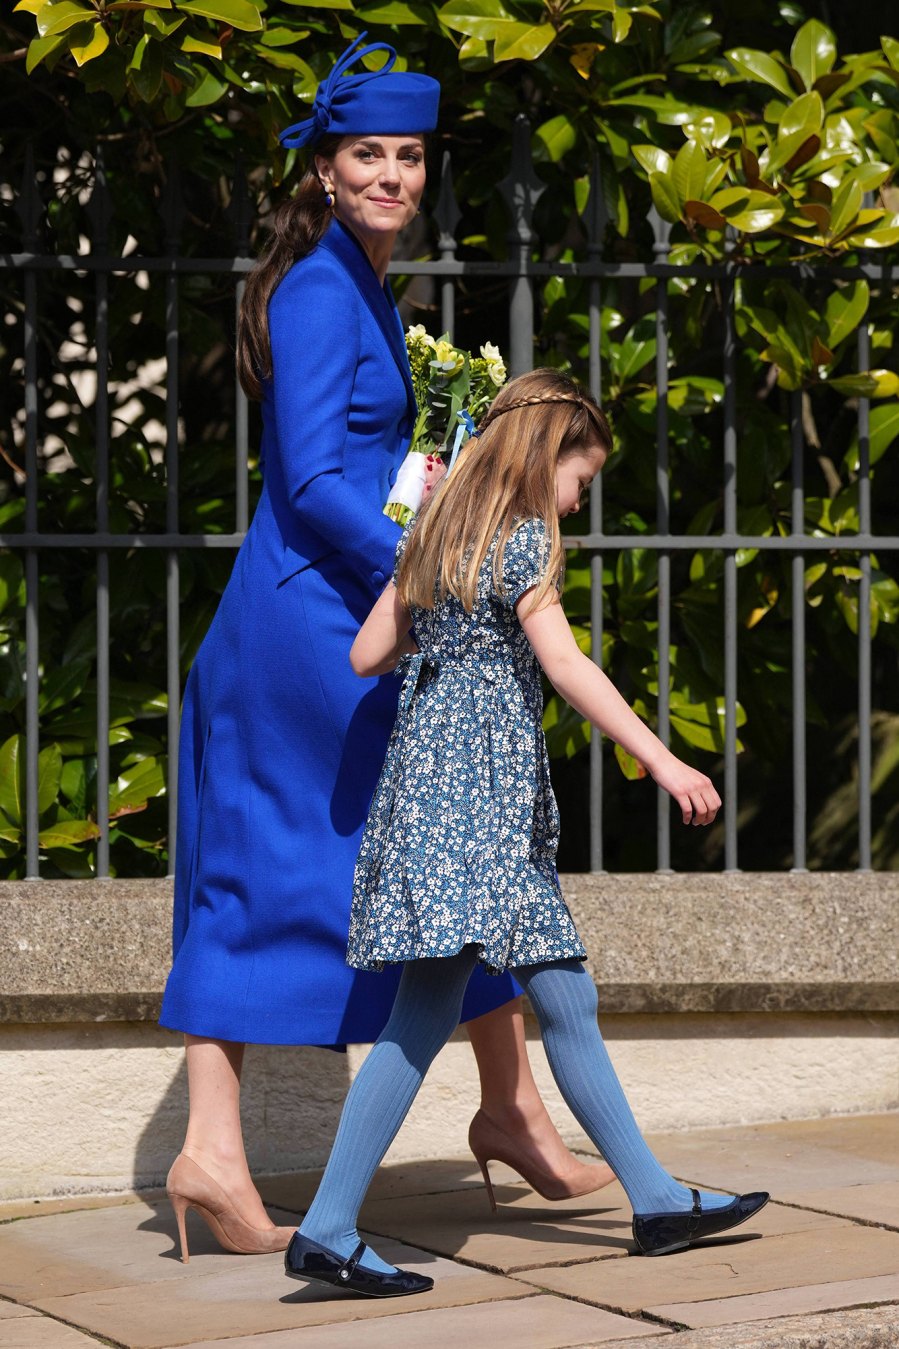 Prince William and Princess Kate Bring Their 3 Children to Mass on Easter Sunday: See Family Photos